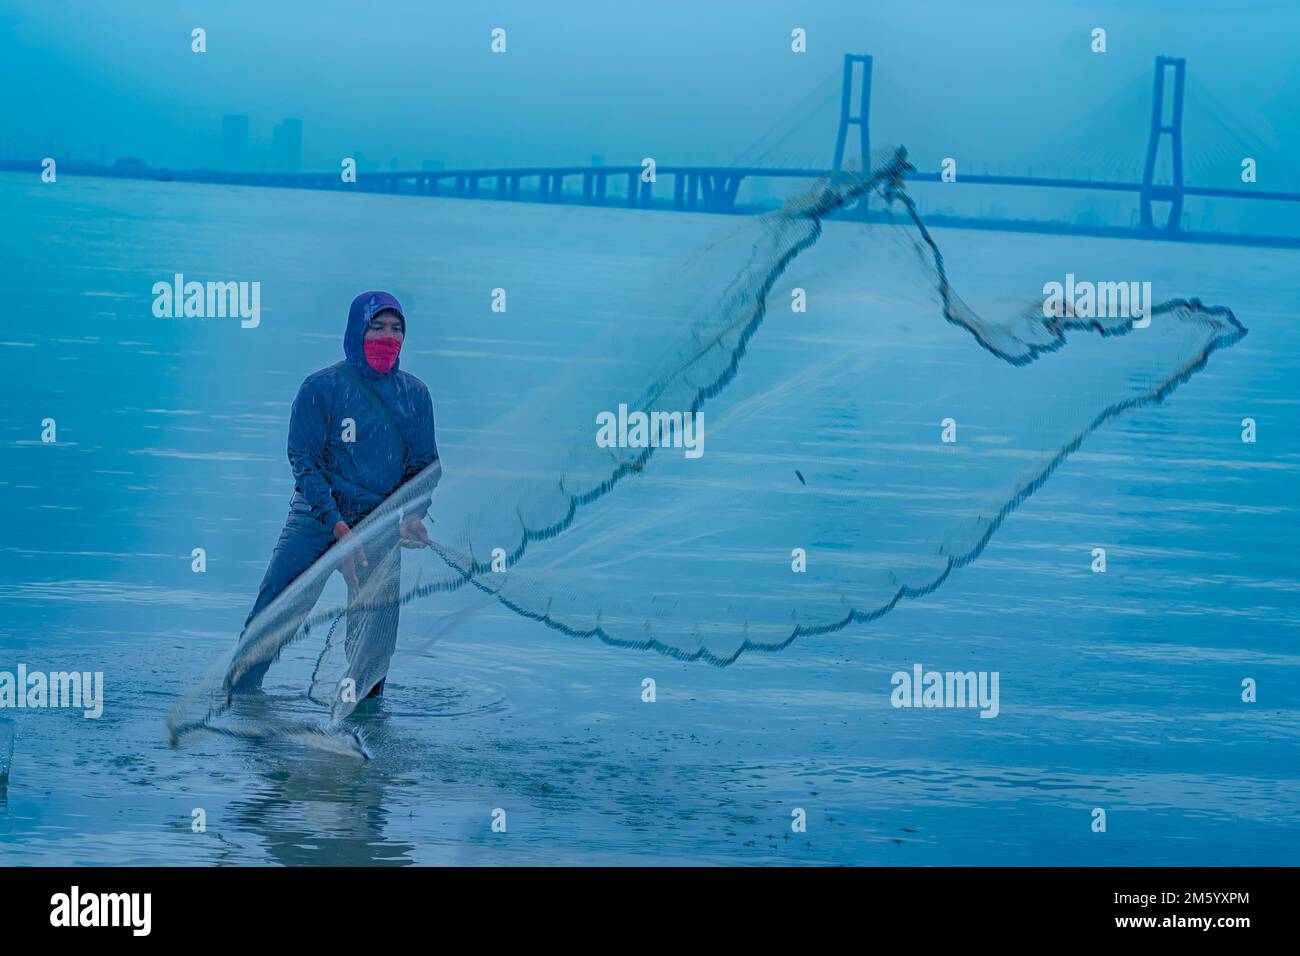 Young boy fishing in stream, using fishing net, low angle view Stock Photo  - Alamy